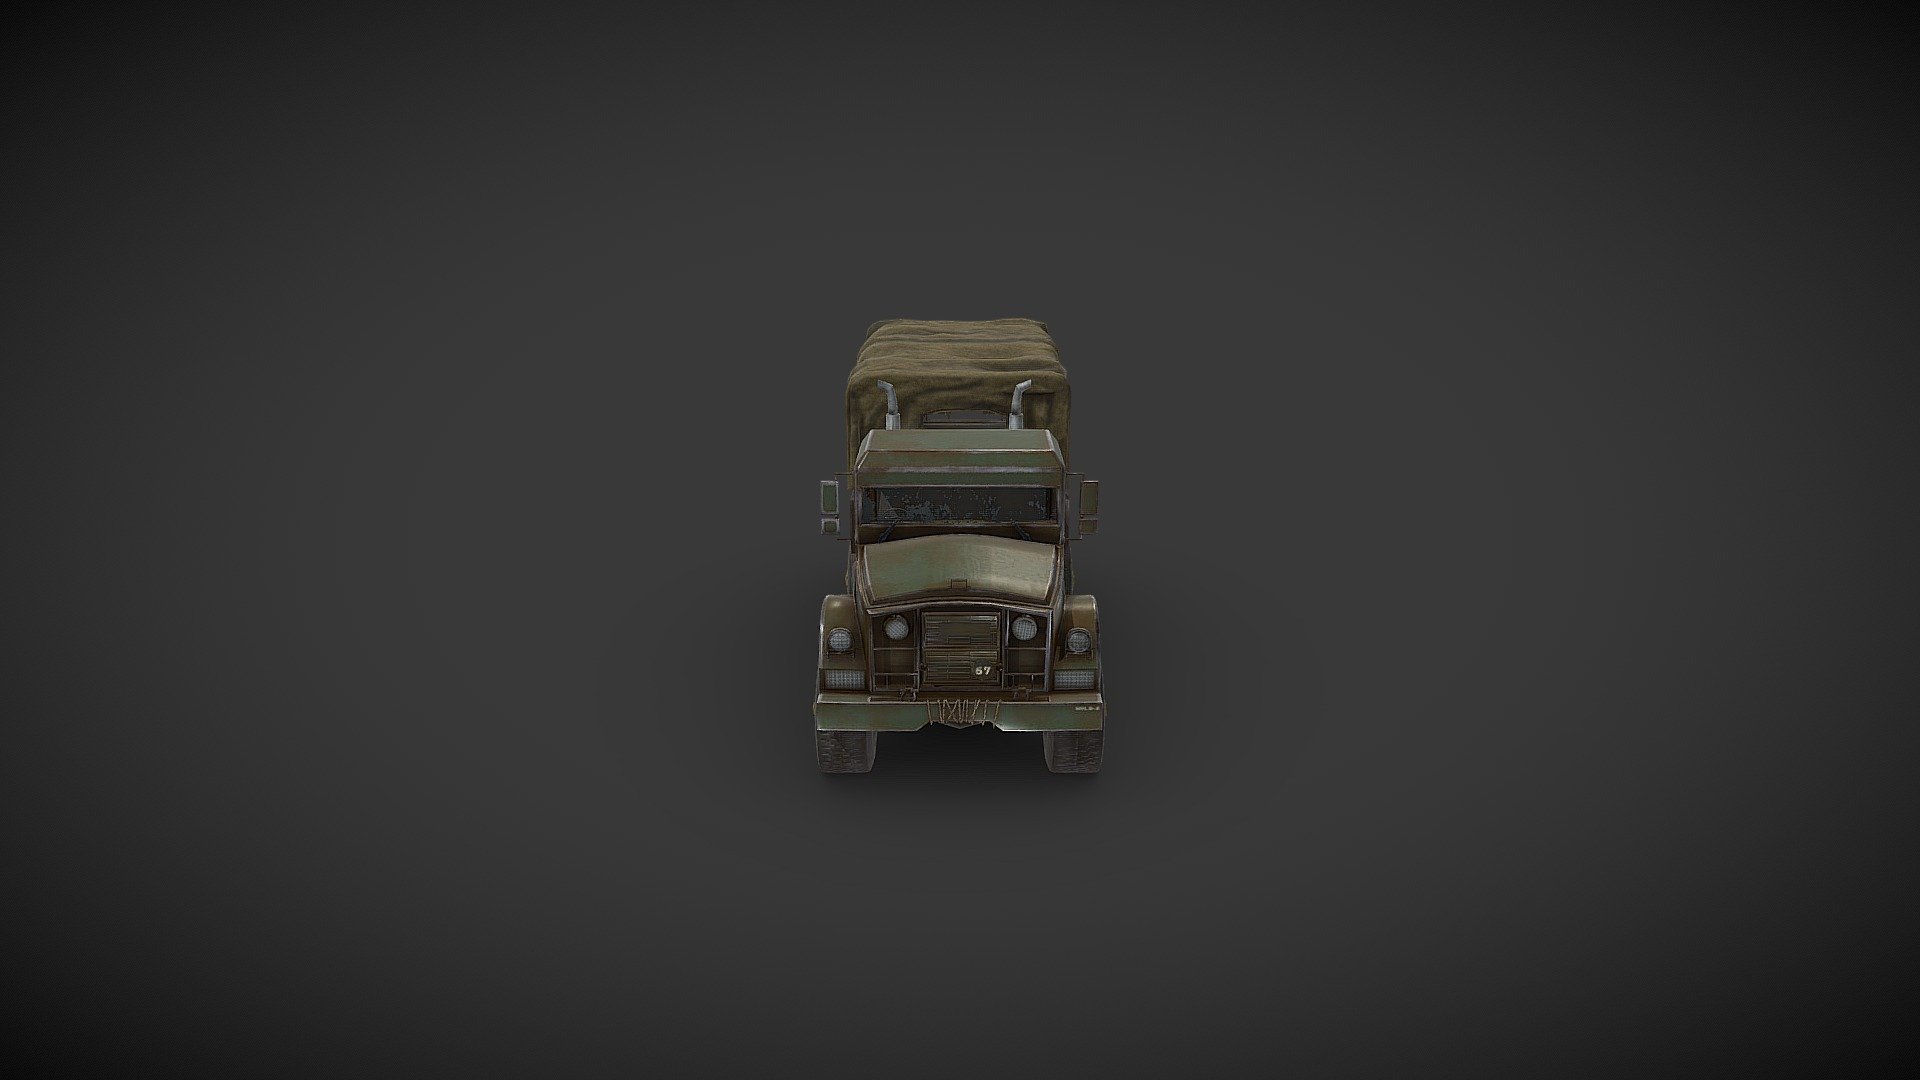 This is 3d model of Truck.
This is realistic 3d model.
This model is made using Autodesk 3DS Max 2021.
All the previews are rendered using Iray Renderer.
This is midpoly model and ready to use for game engine.
PBR textures are used in 1024x1024 resolutions.

All the textures and 3ds max files are attached with this.

Polys:       21,803
Vertices:  22,794

This 3d model is available in 5 formats
1. Max
2. Dae
3. Obj &amp; Mtl
4. Fbx
5. 3ds

All this files/formats can be import into any of your favorite software.

If you have any queries, feel free to contact me.

Portfolio Link: https://www.artstation.com/artwork/5Xr9Xz

Thanks &amp; Regards,
Artist Swastika Bhadury - Truck - Buy Royalty Free 3D model by swastika (@chinababa) 3d model